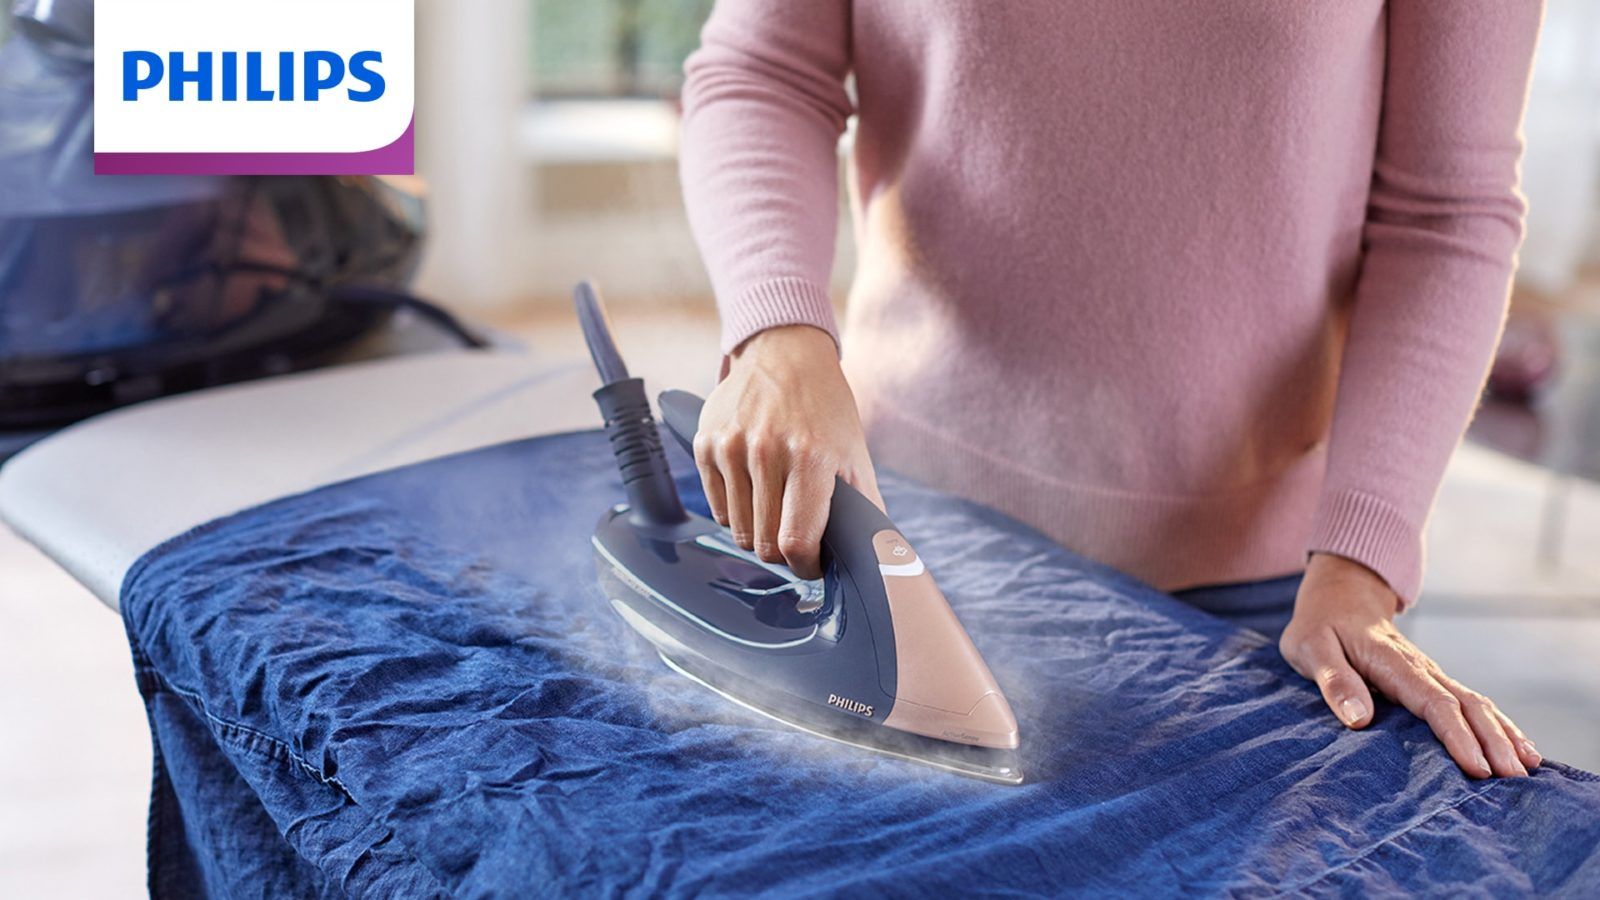 Review: The Philips PerfectCare 9000 iron smooths out laundry wrinkles